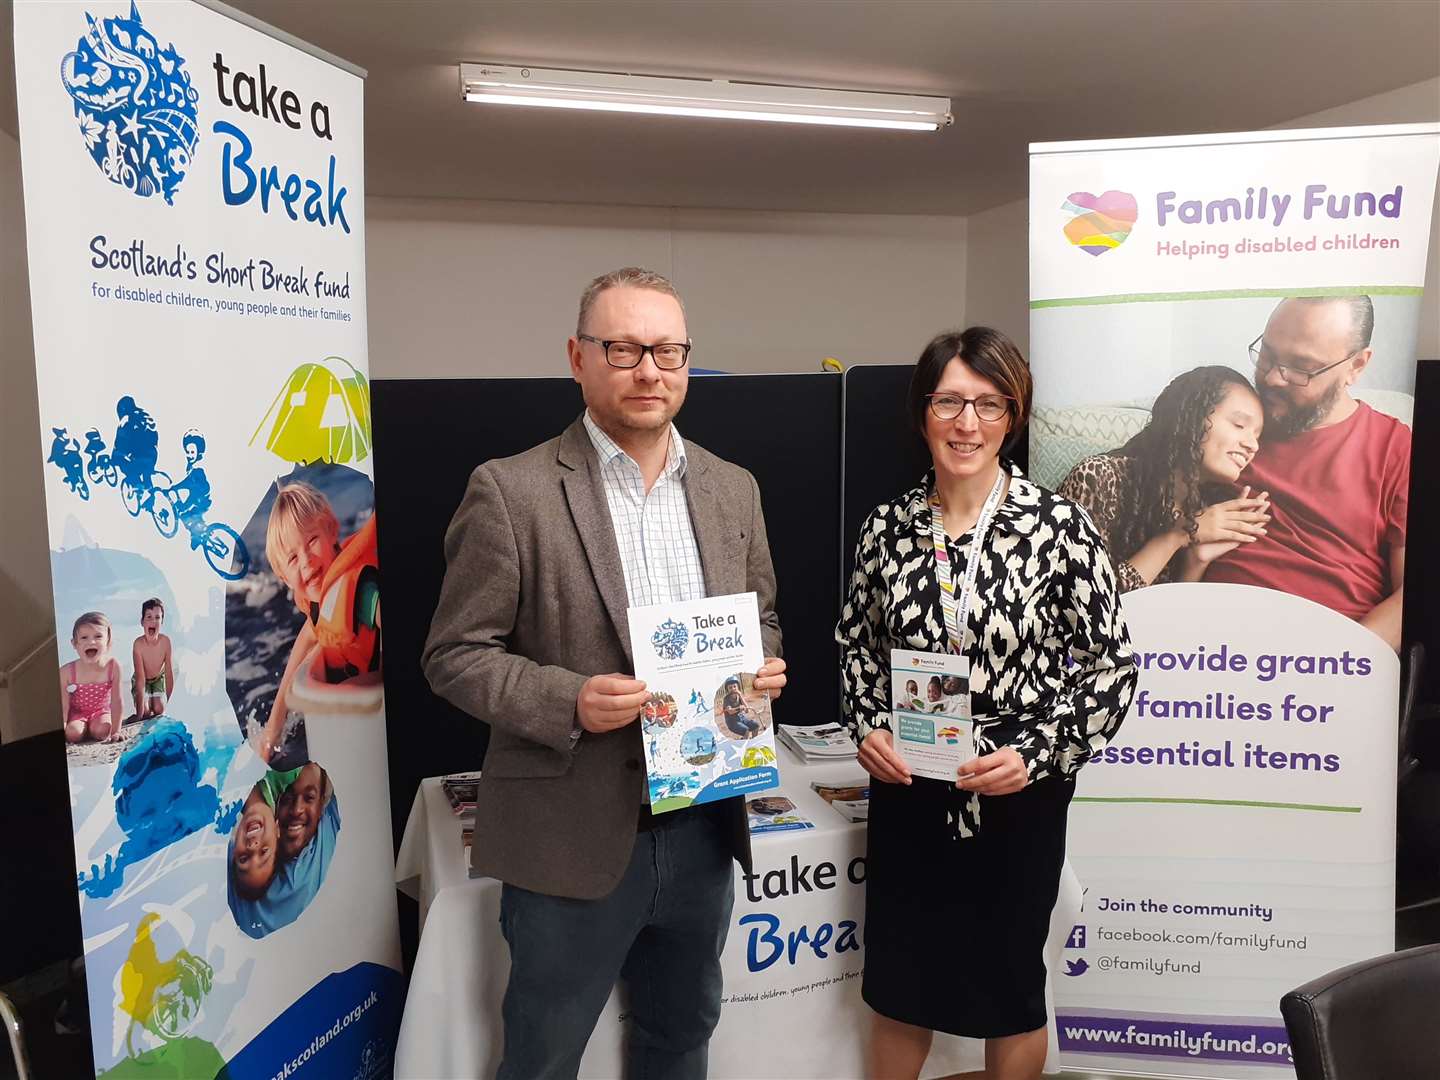 Richard Thomson MP with Salena Begley of Family Fund at the event in Huntly.